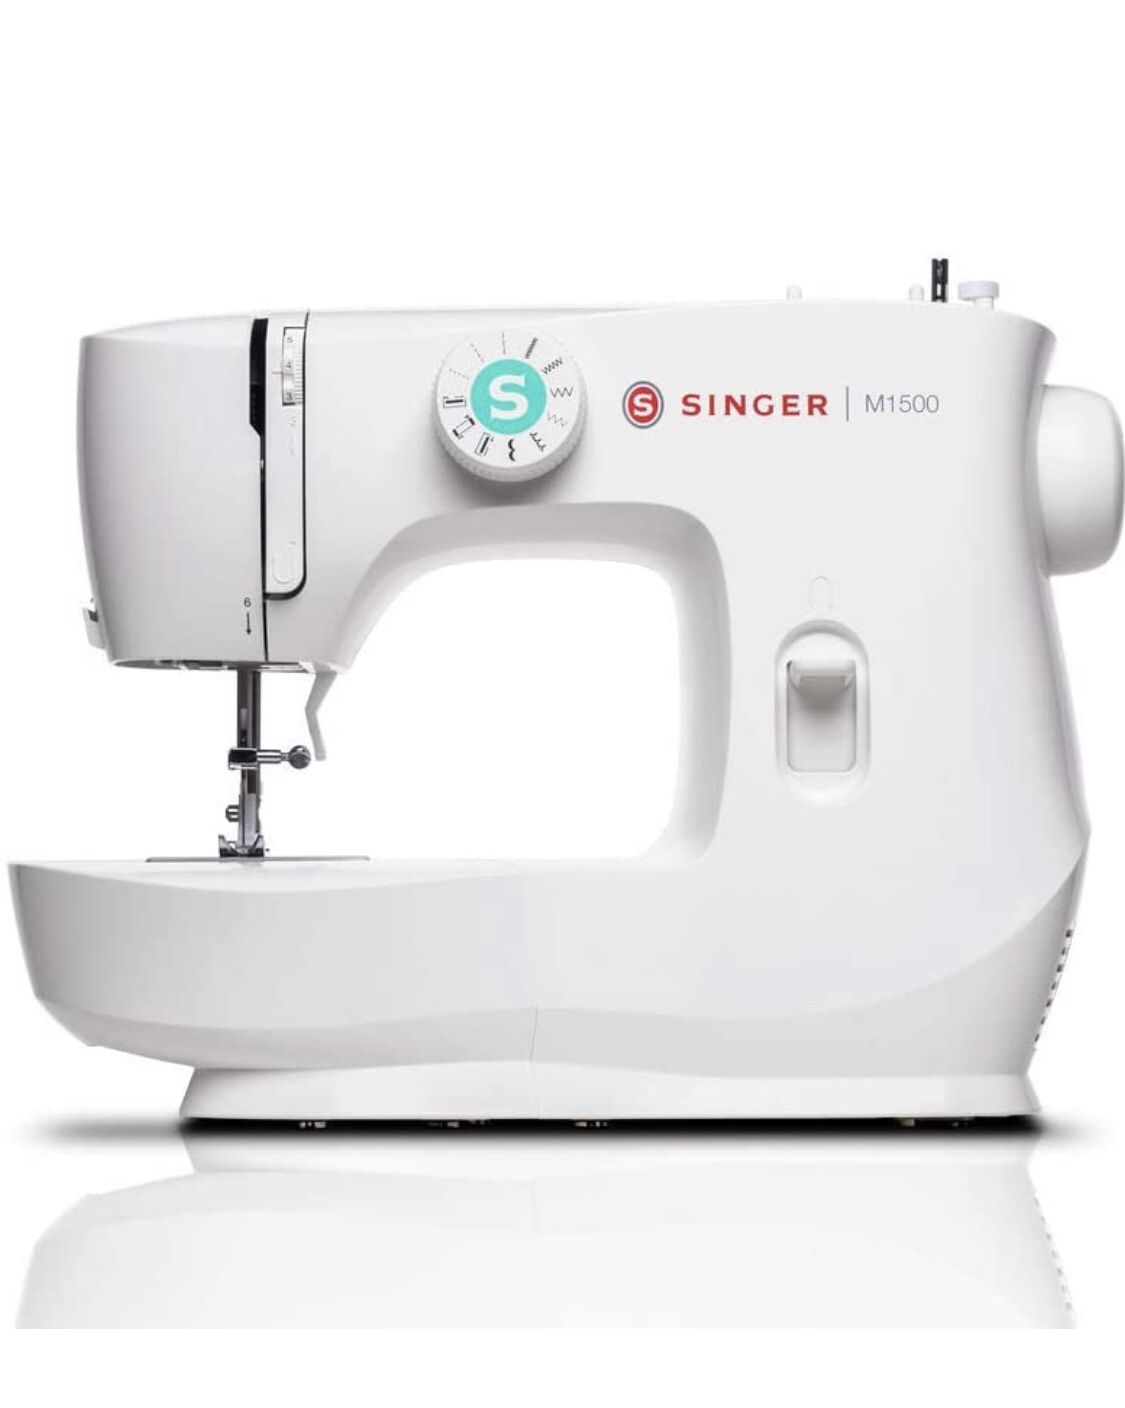 NEW🔥 Singer M1500 Sewing Machine with 6 Built-In Stitches